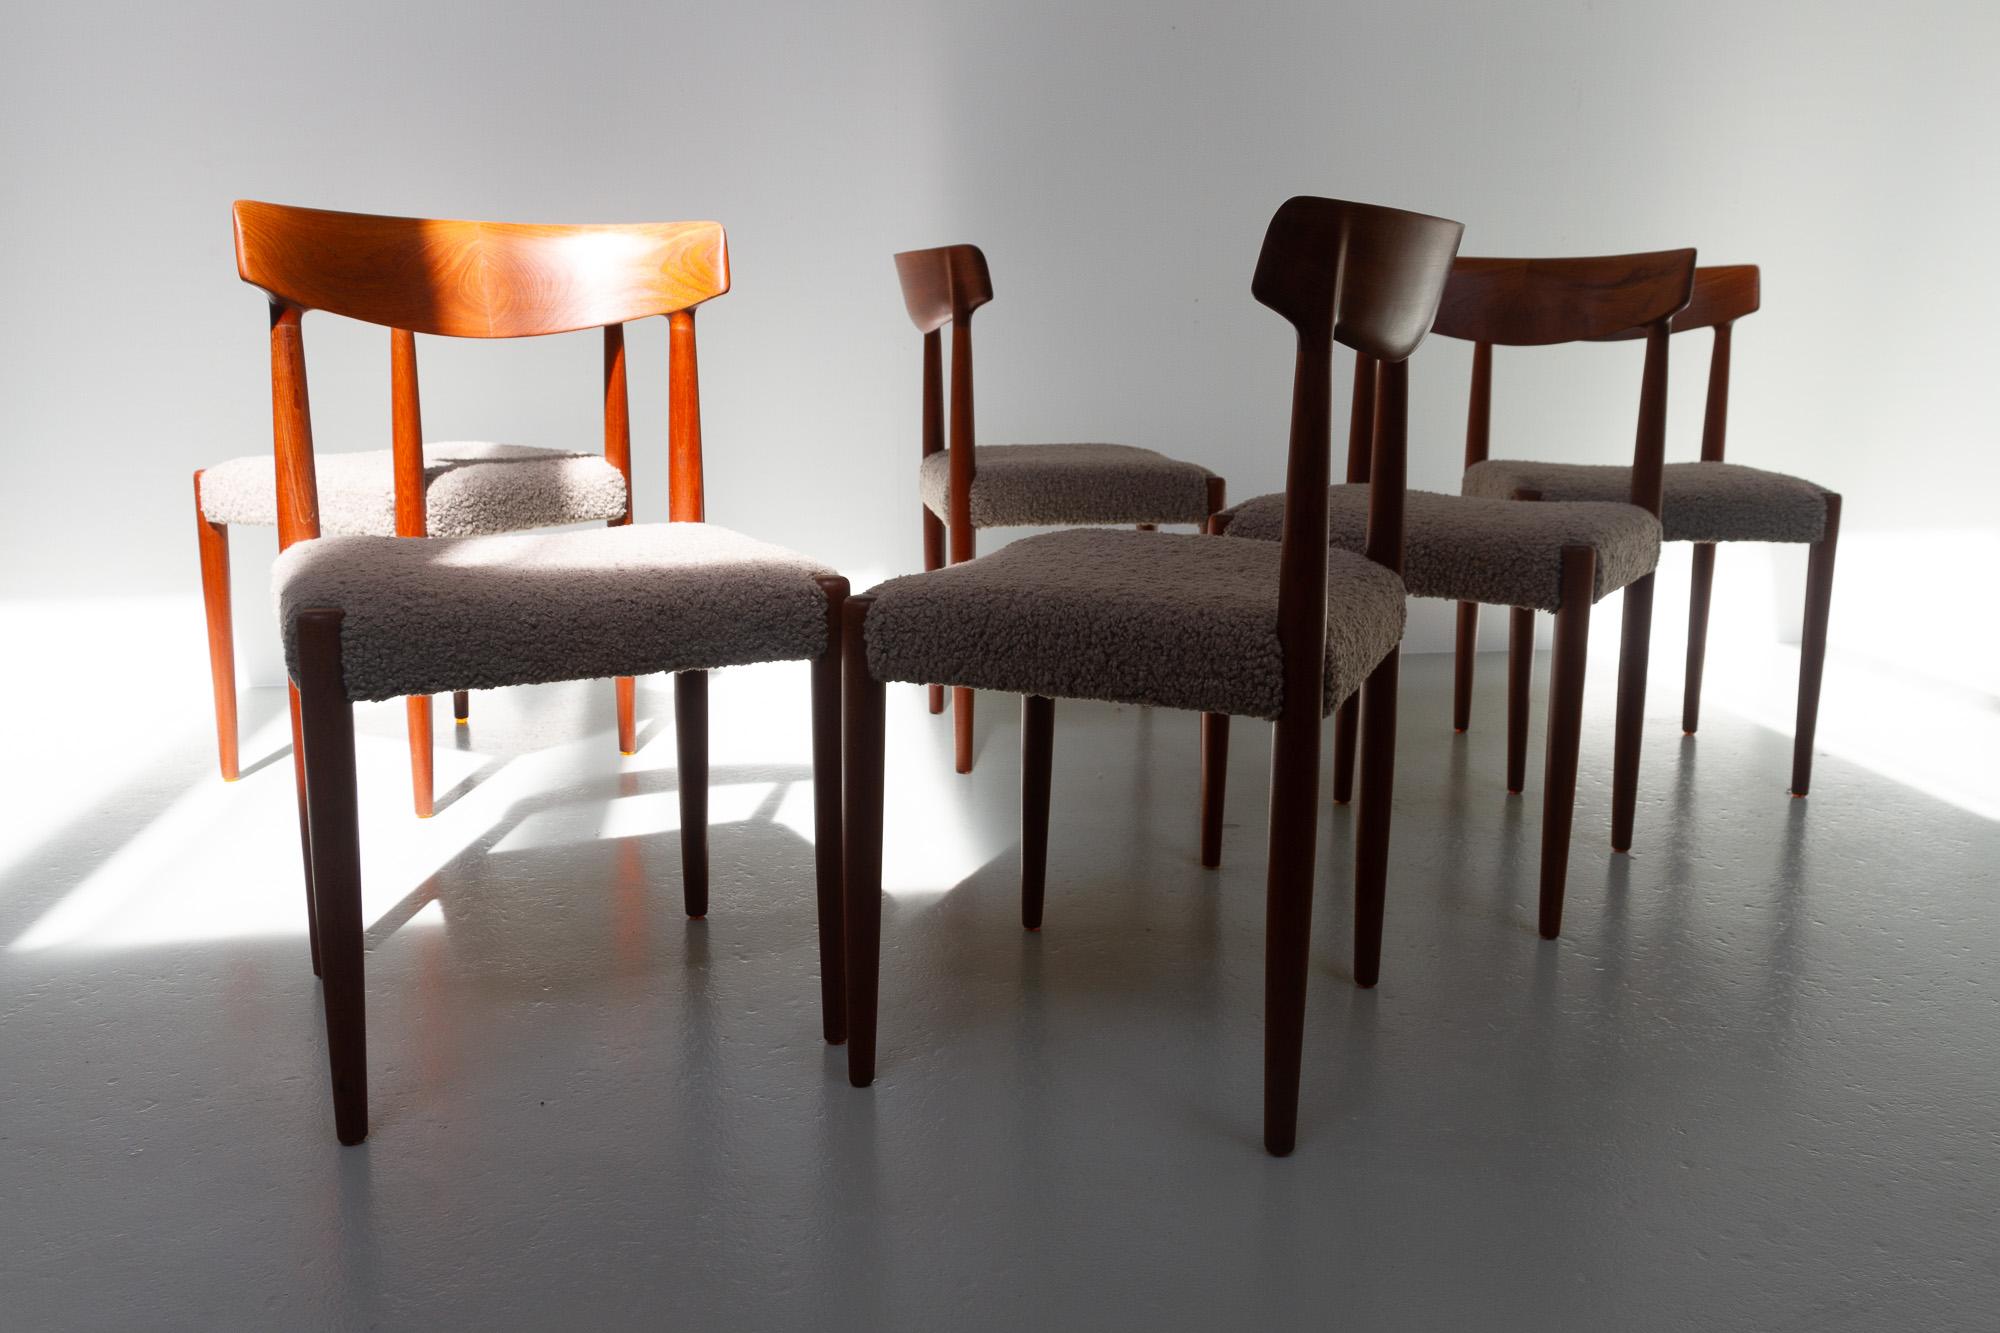 Danish Modern Teak Dining Chairs by Knud Færch for Slagelse, 1960s. Set of 6. For Sale 9